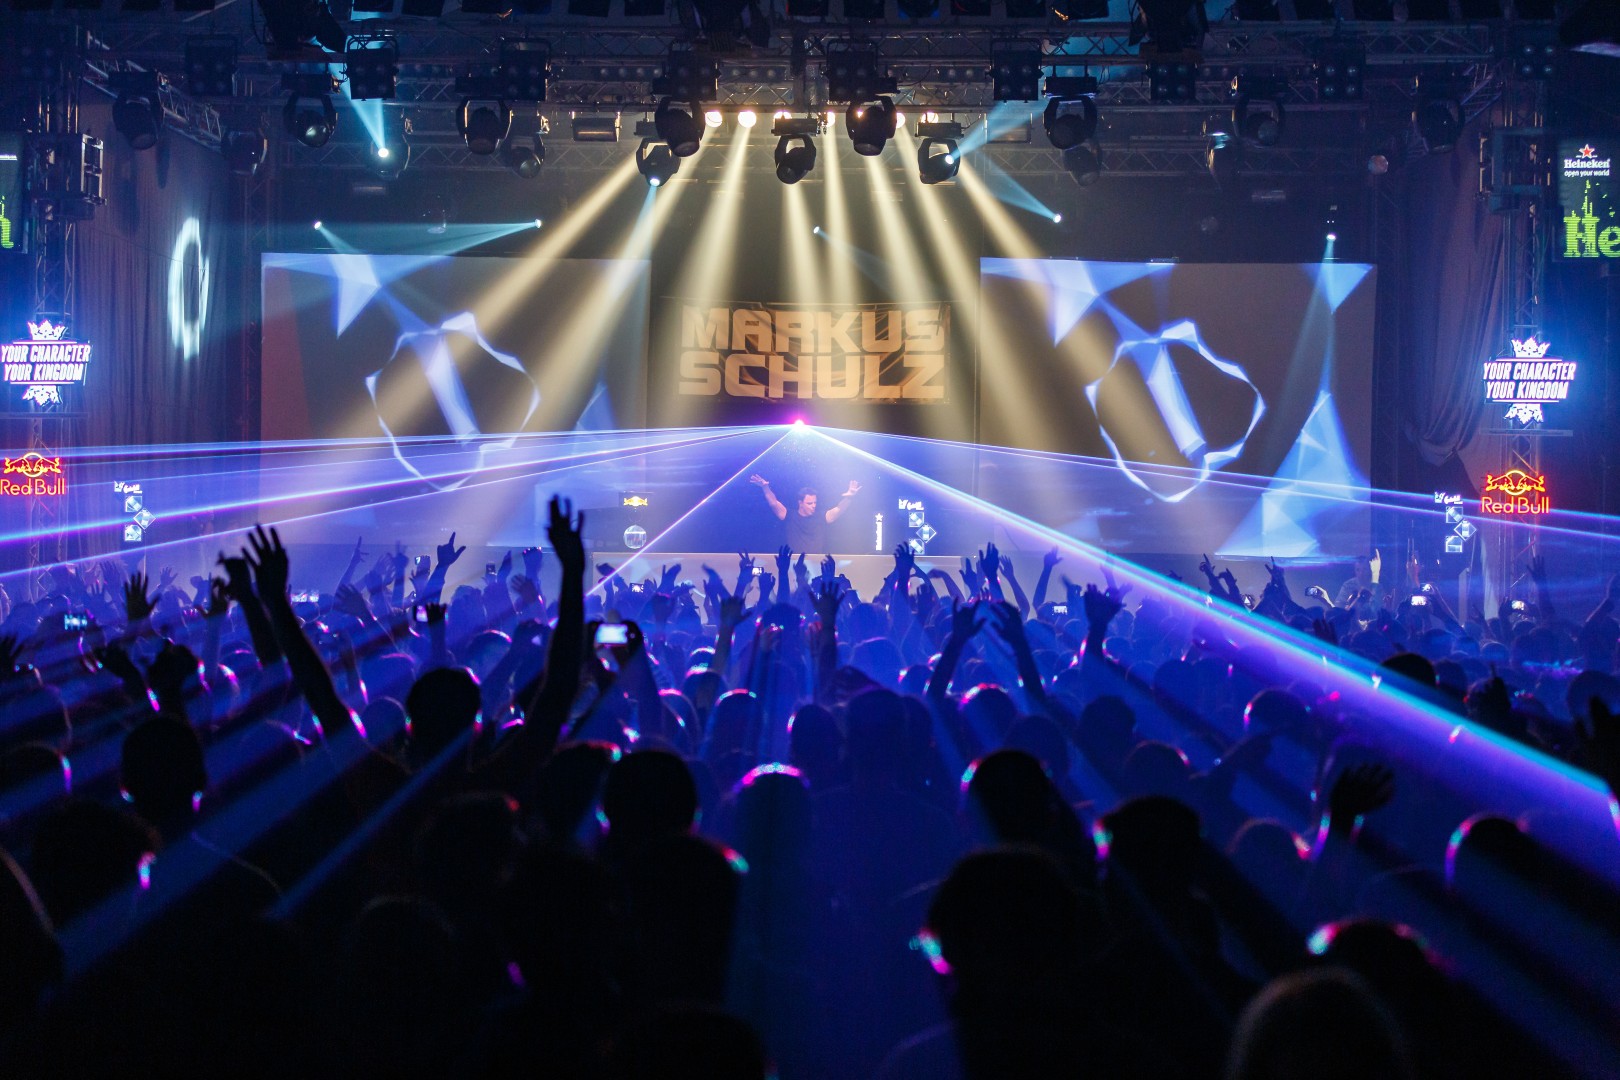 Markus Schulz at Arenele Romane in Bucharest on February 8, 2015 (c4afd503cb)